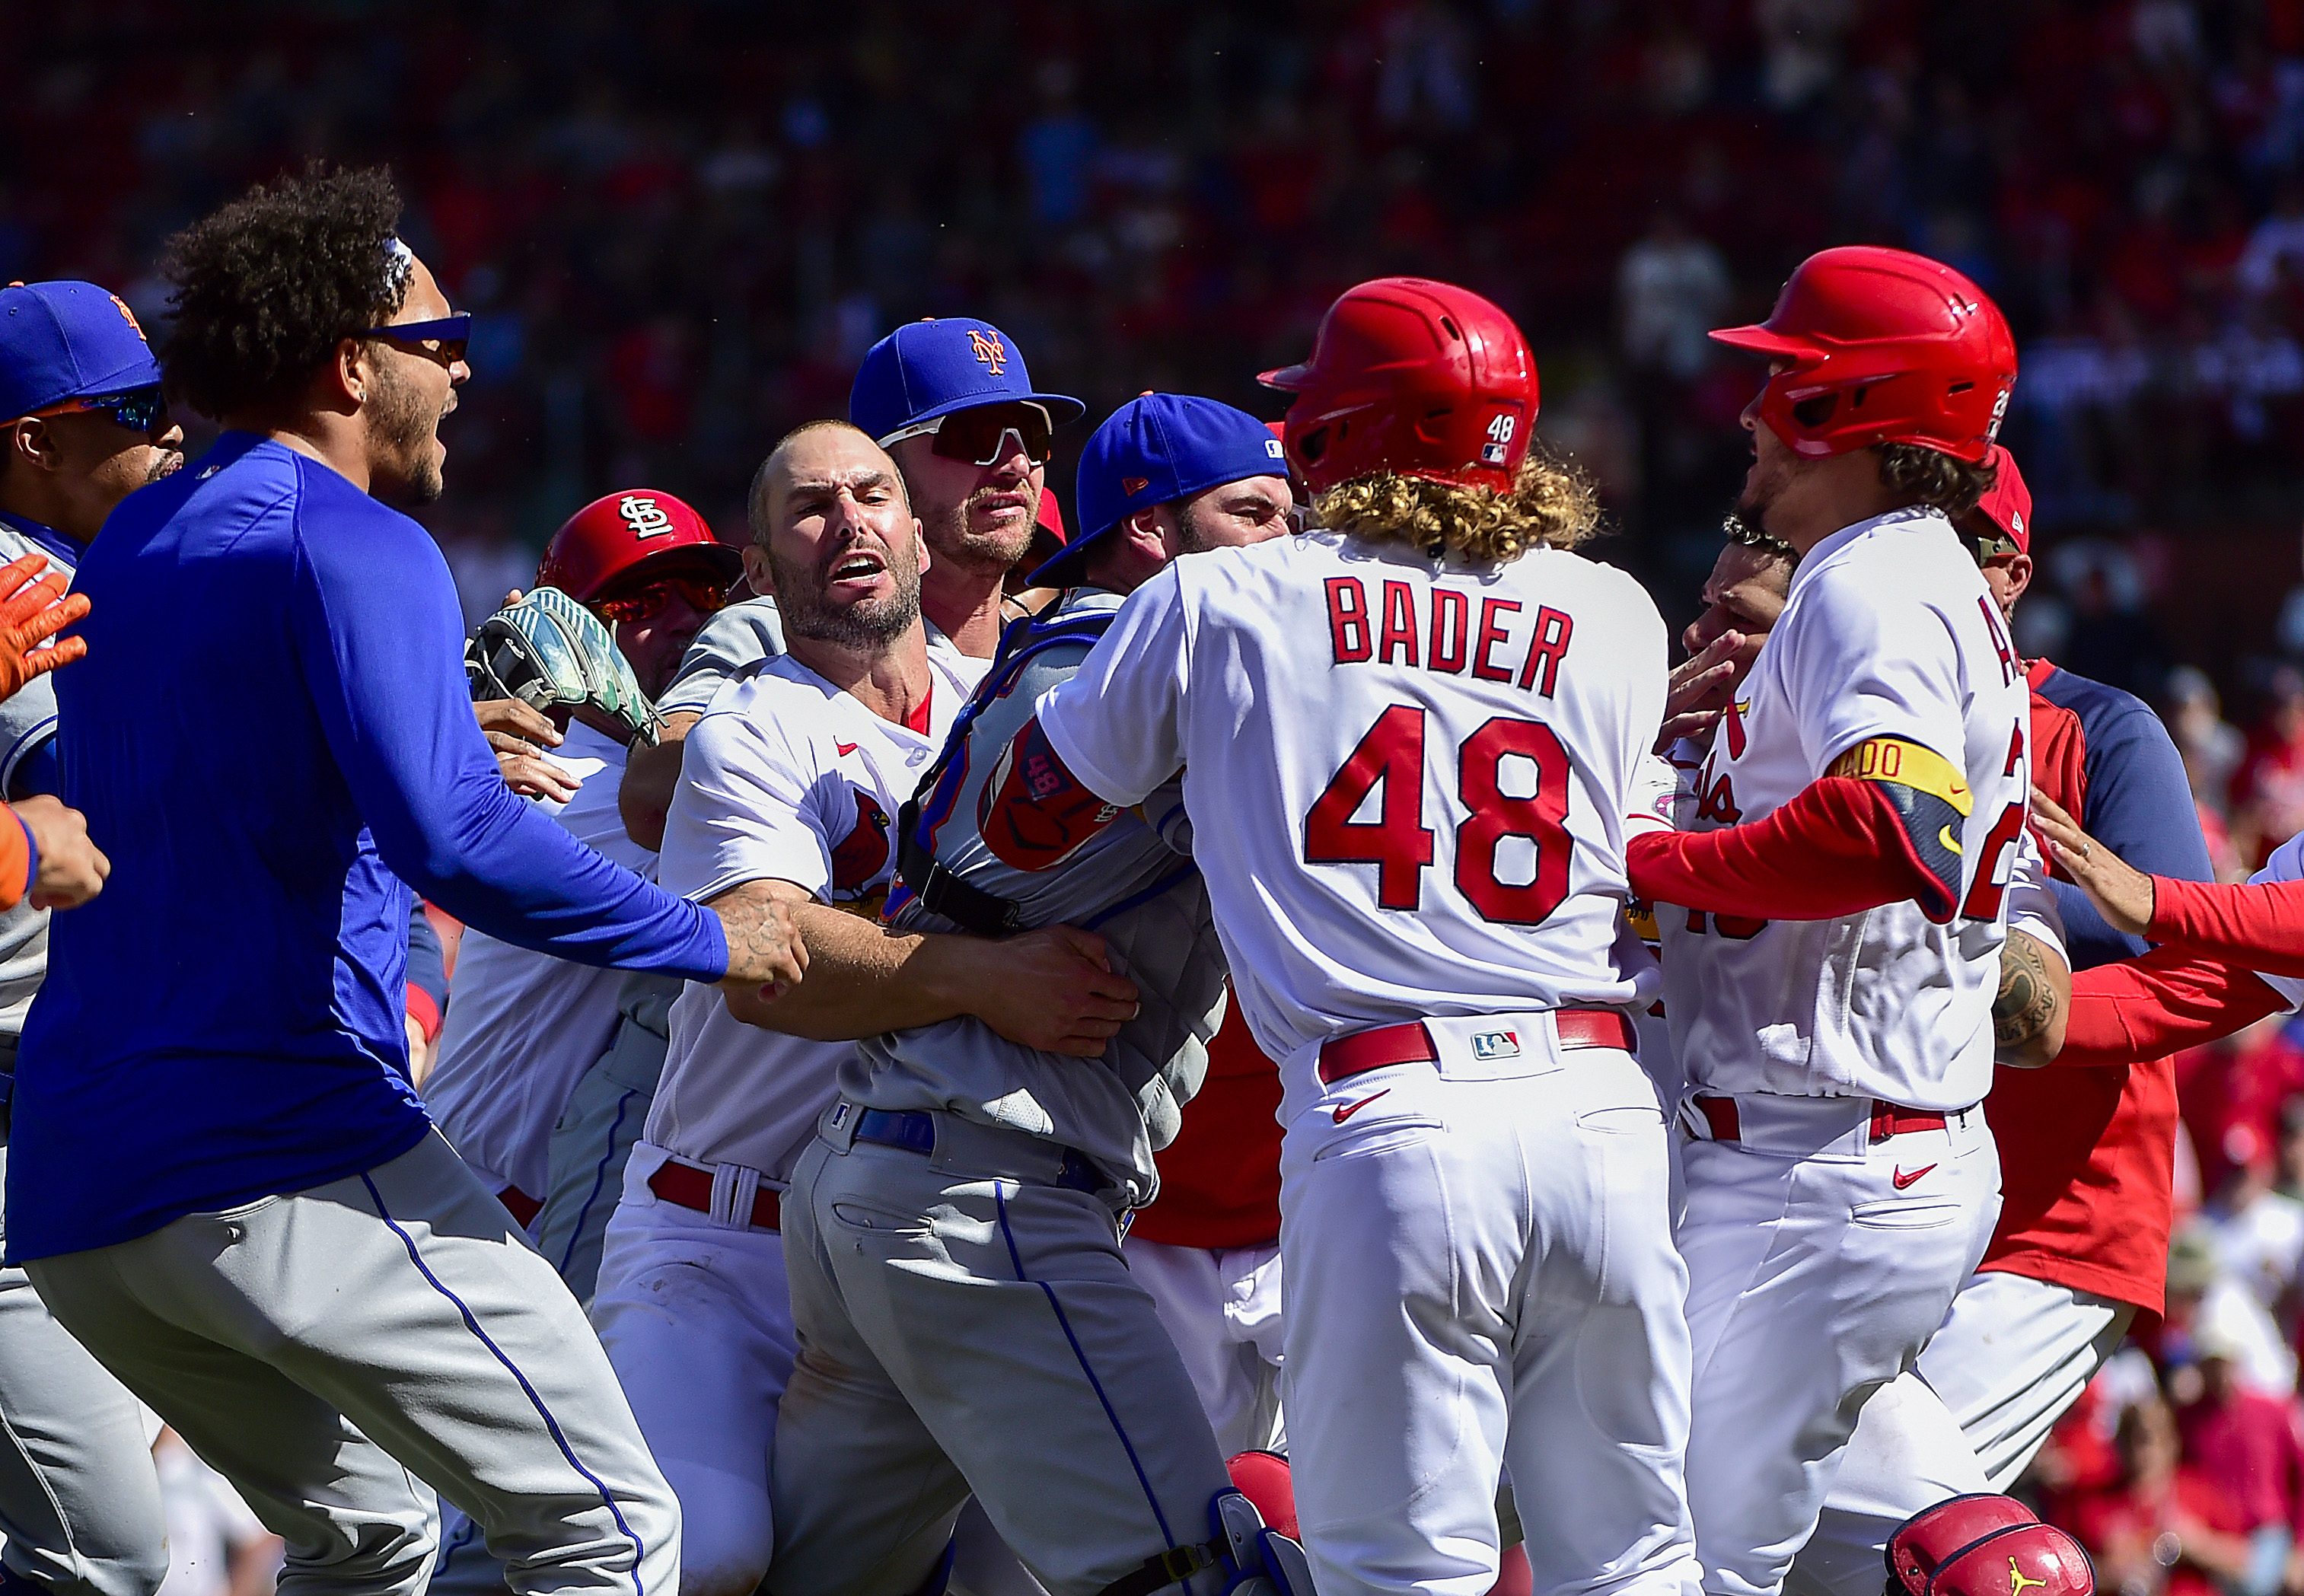 Mets set franchise record after toppling Cardinals again